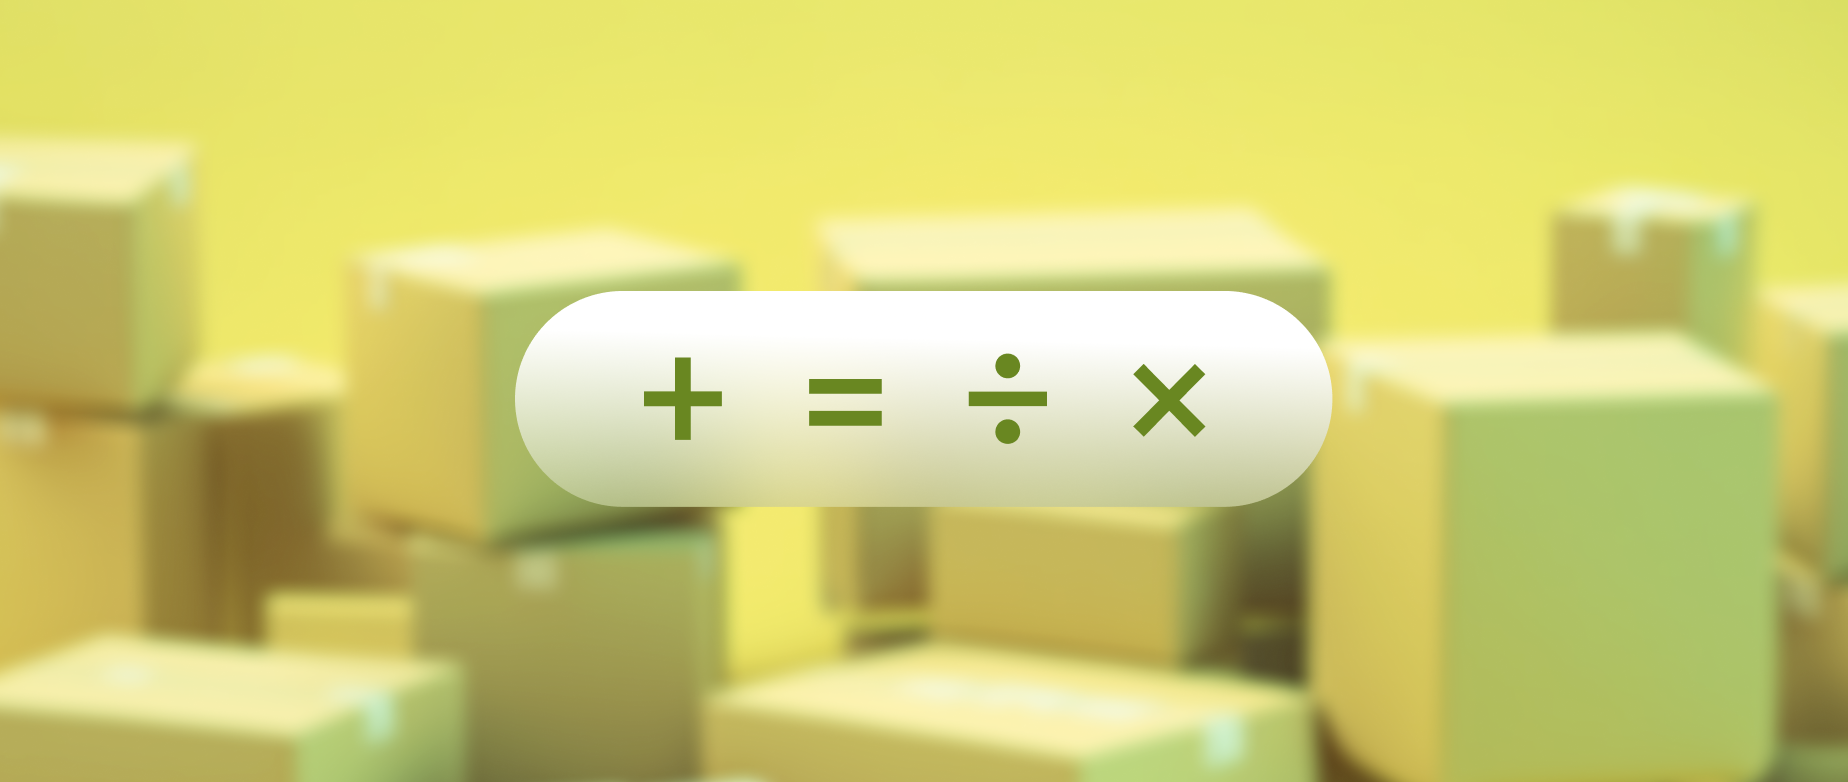 mathematical symbols in the forefront of an image with shipping boxes in the background: inventory formulas